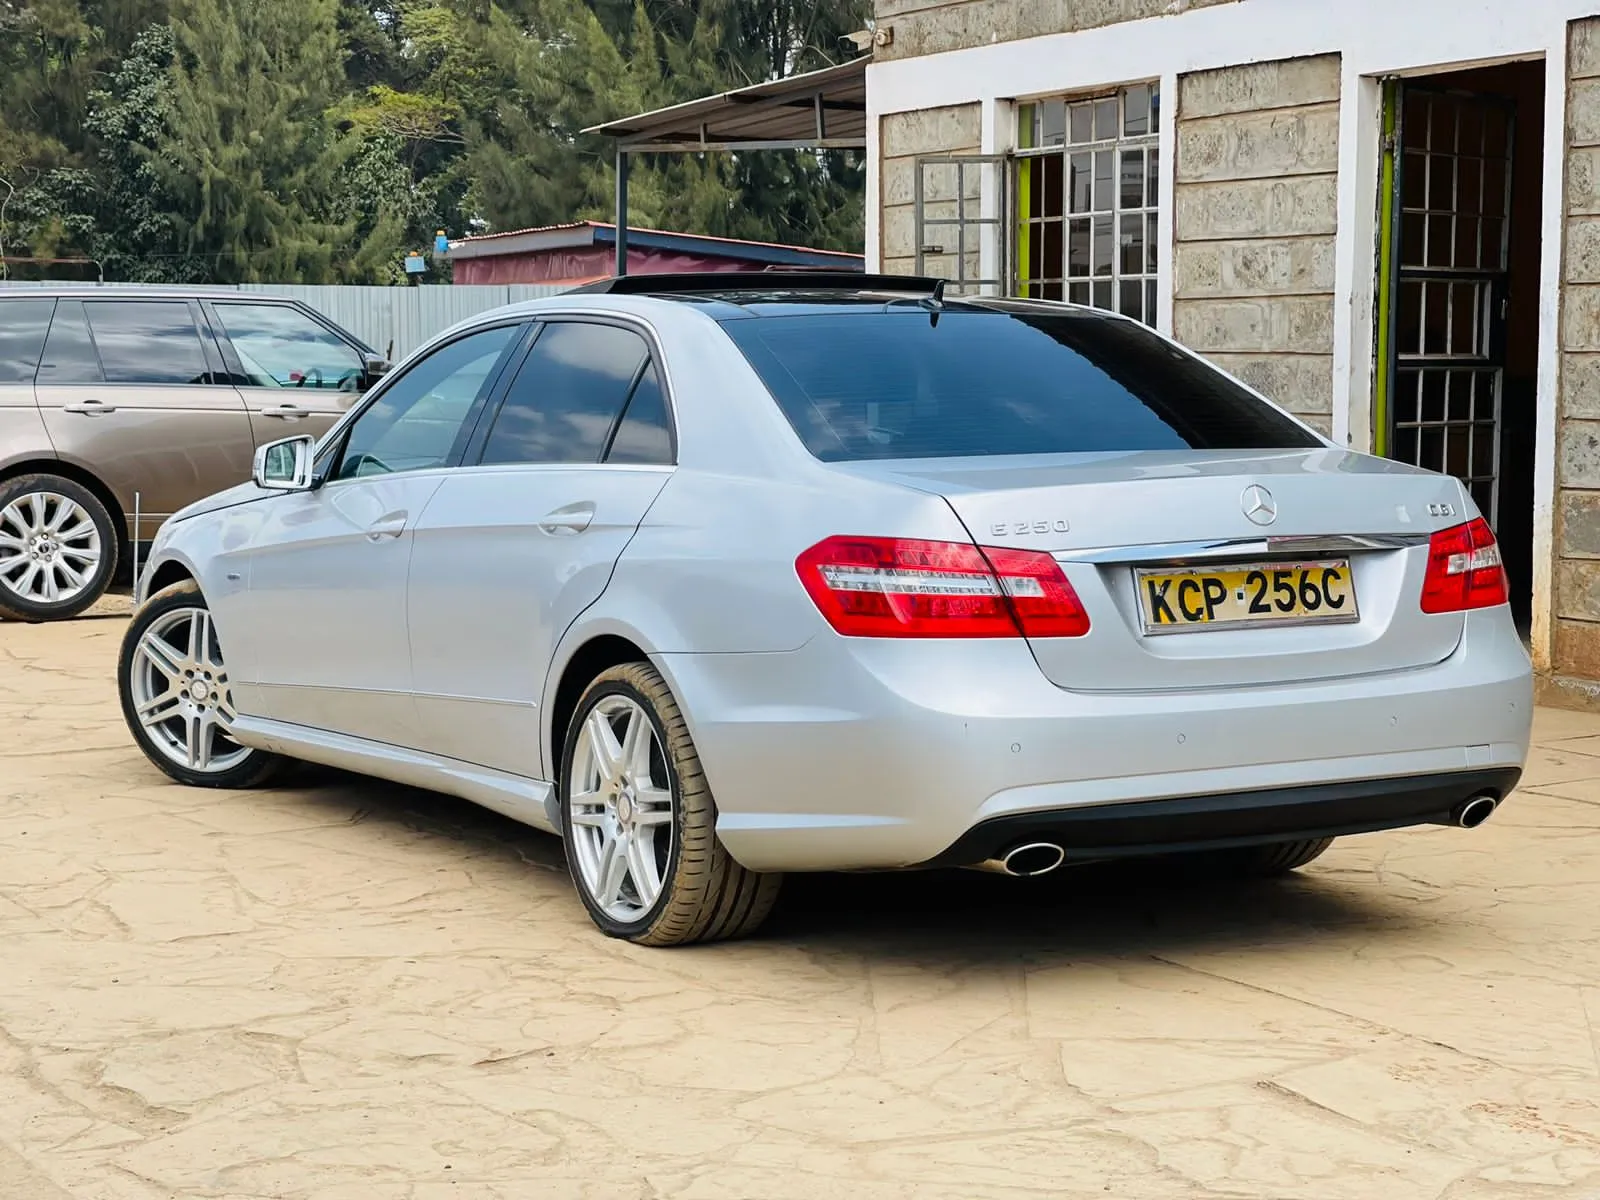 Cars Cars For Sale/Vehicles Saloon/Sedan-Mercedes Benz E250 CGI fully loaded as New Pay 30% 70% in 60 months Wow